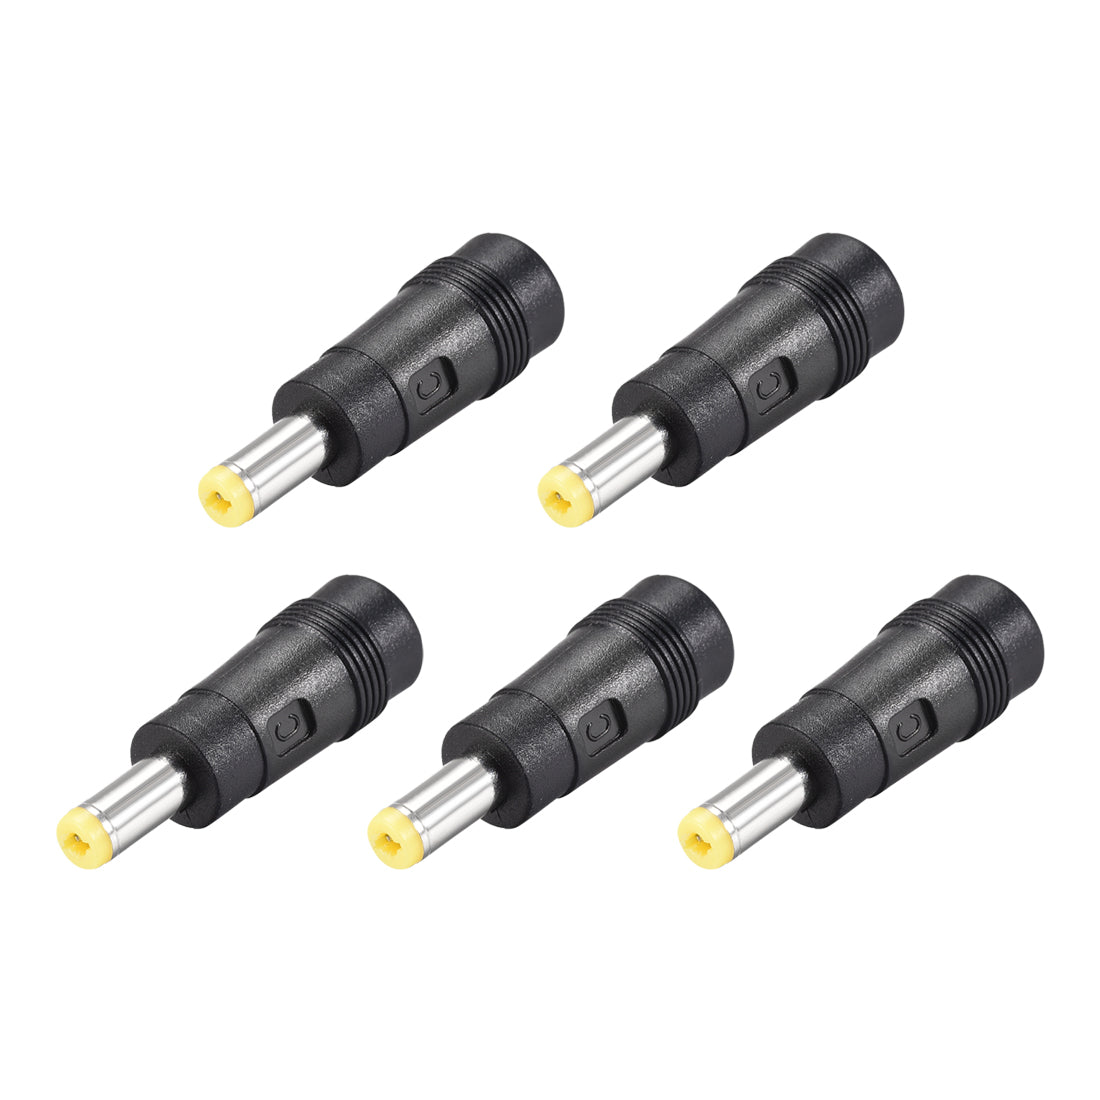 Uxcell Uxcell 8Pcs DC Power Converter 5.5mm x 2.5mm Male to 5.5mm x 2.1mm Female Connector